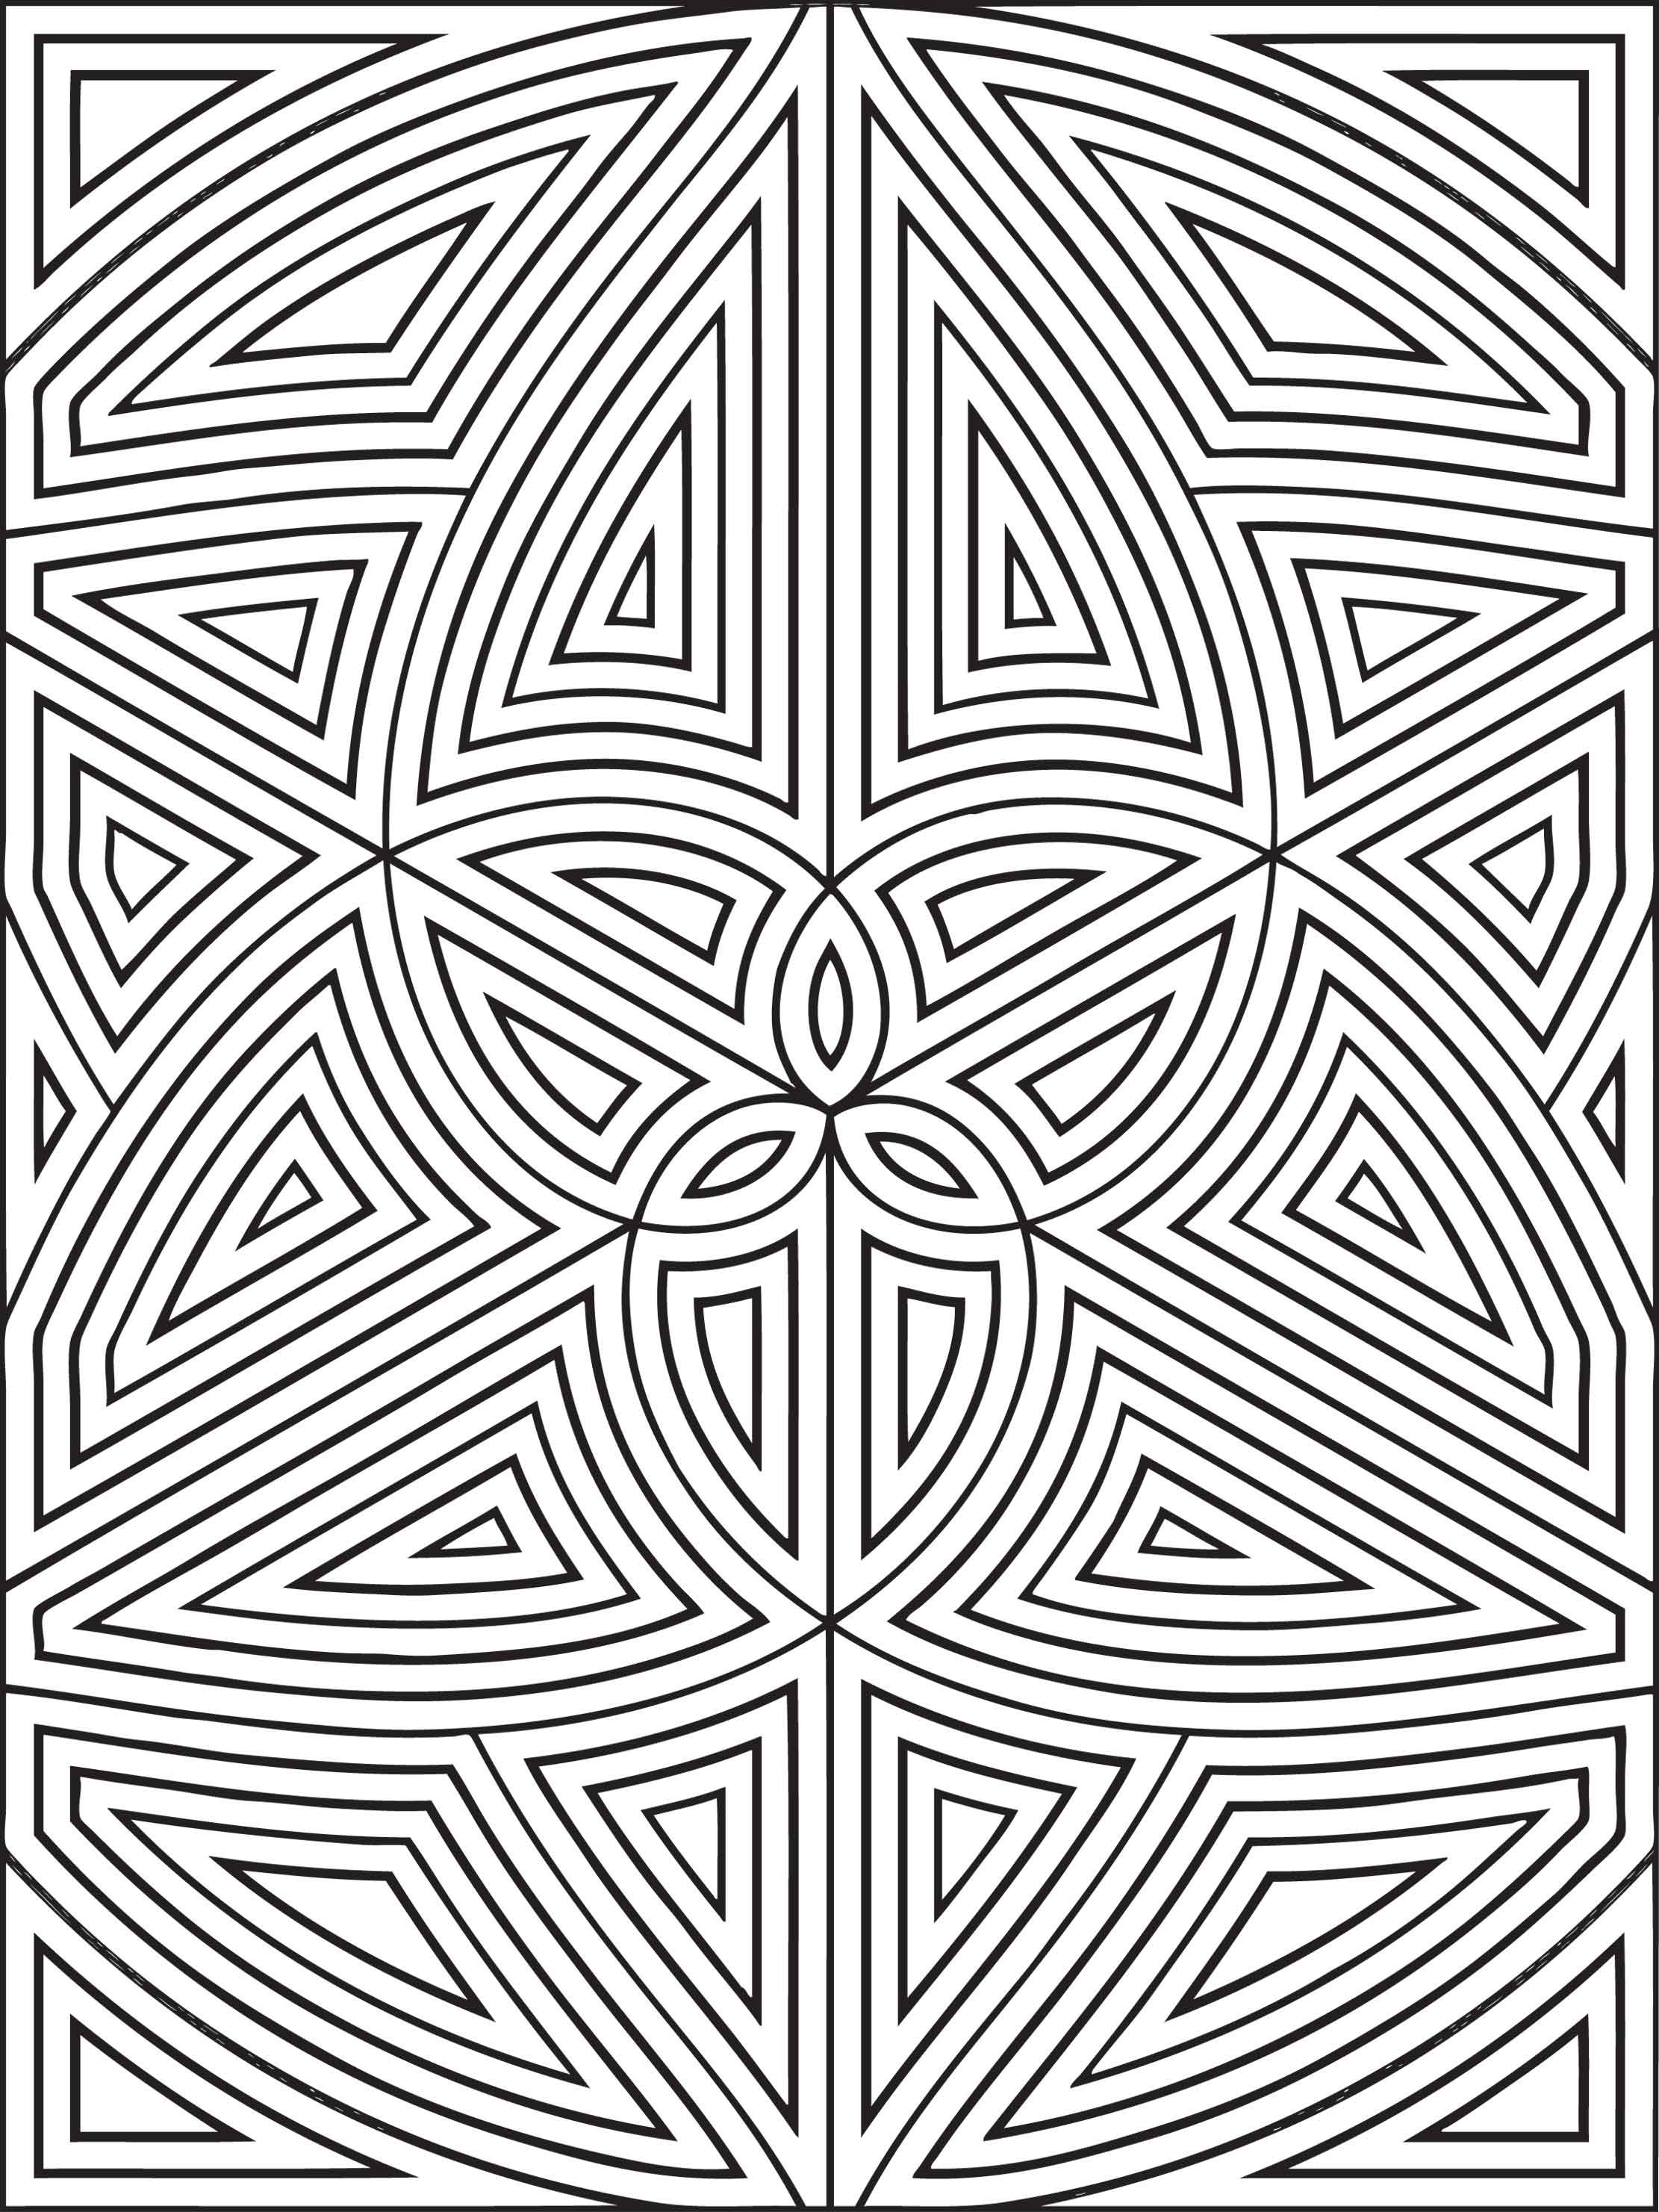 78 Top Coloring Pages For Adults Geometric Images & Pictures In HD